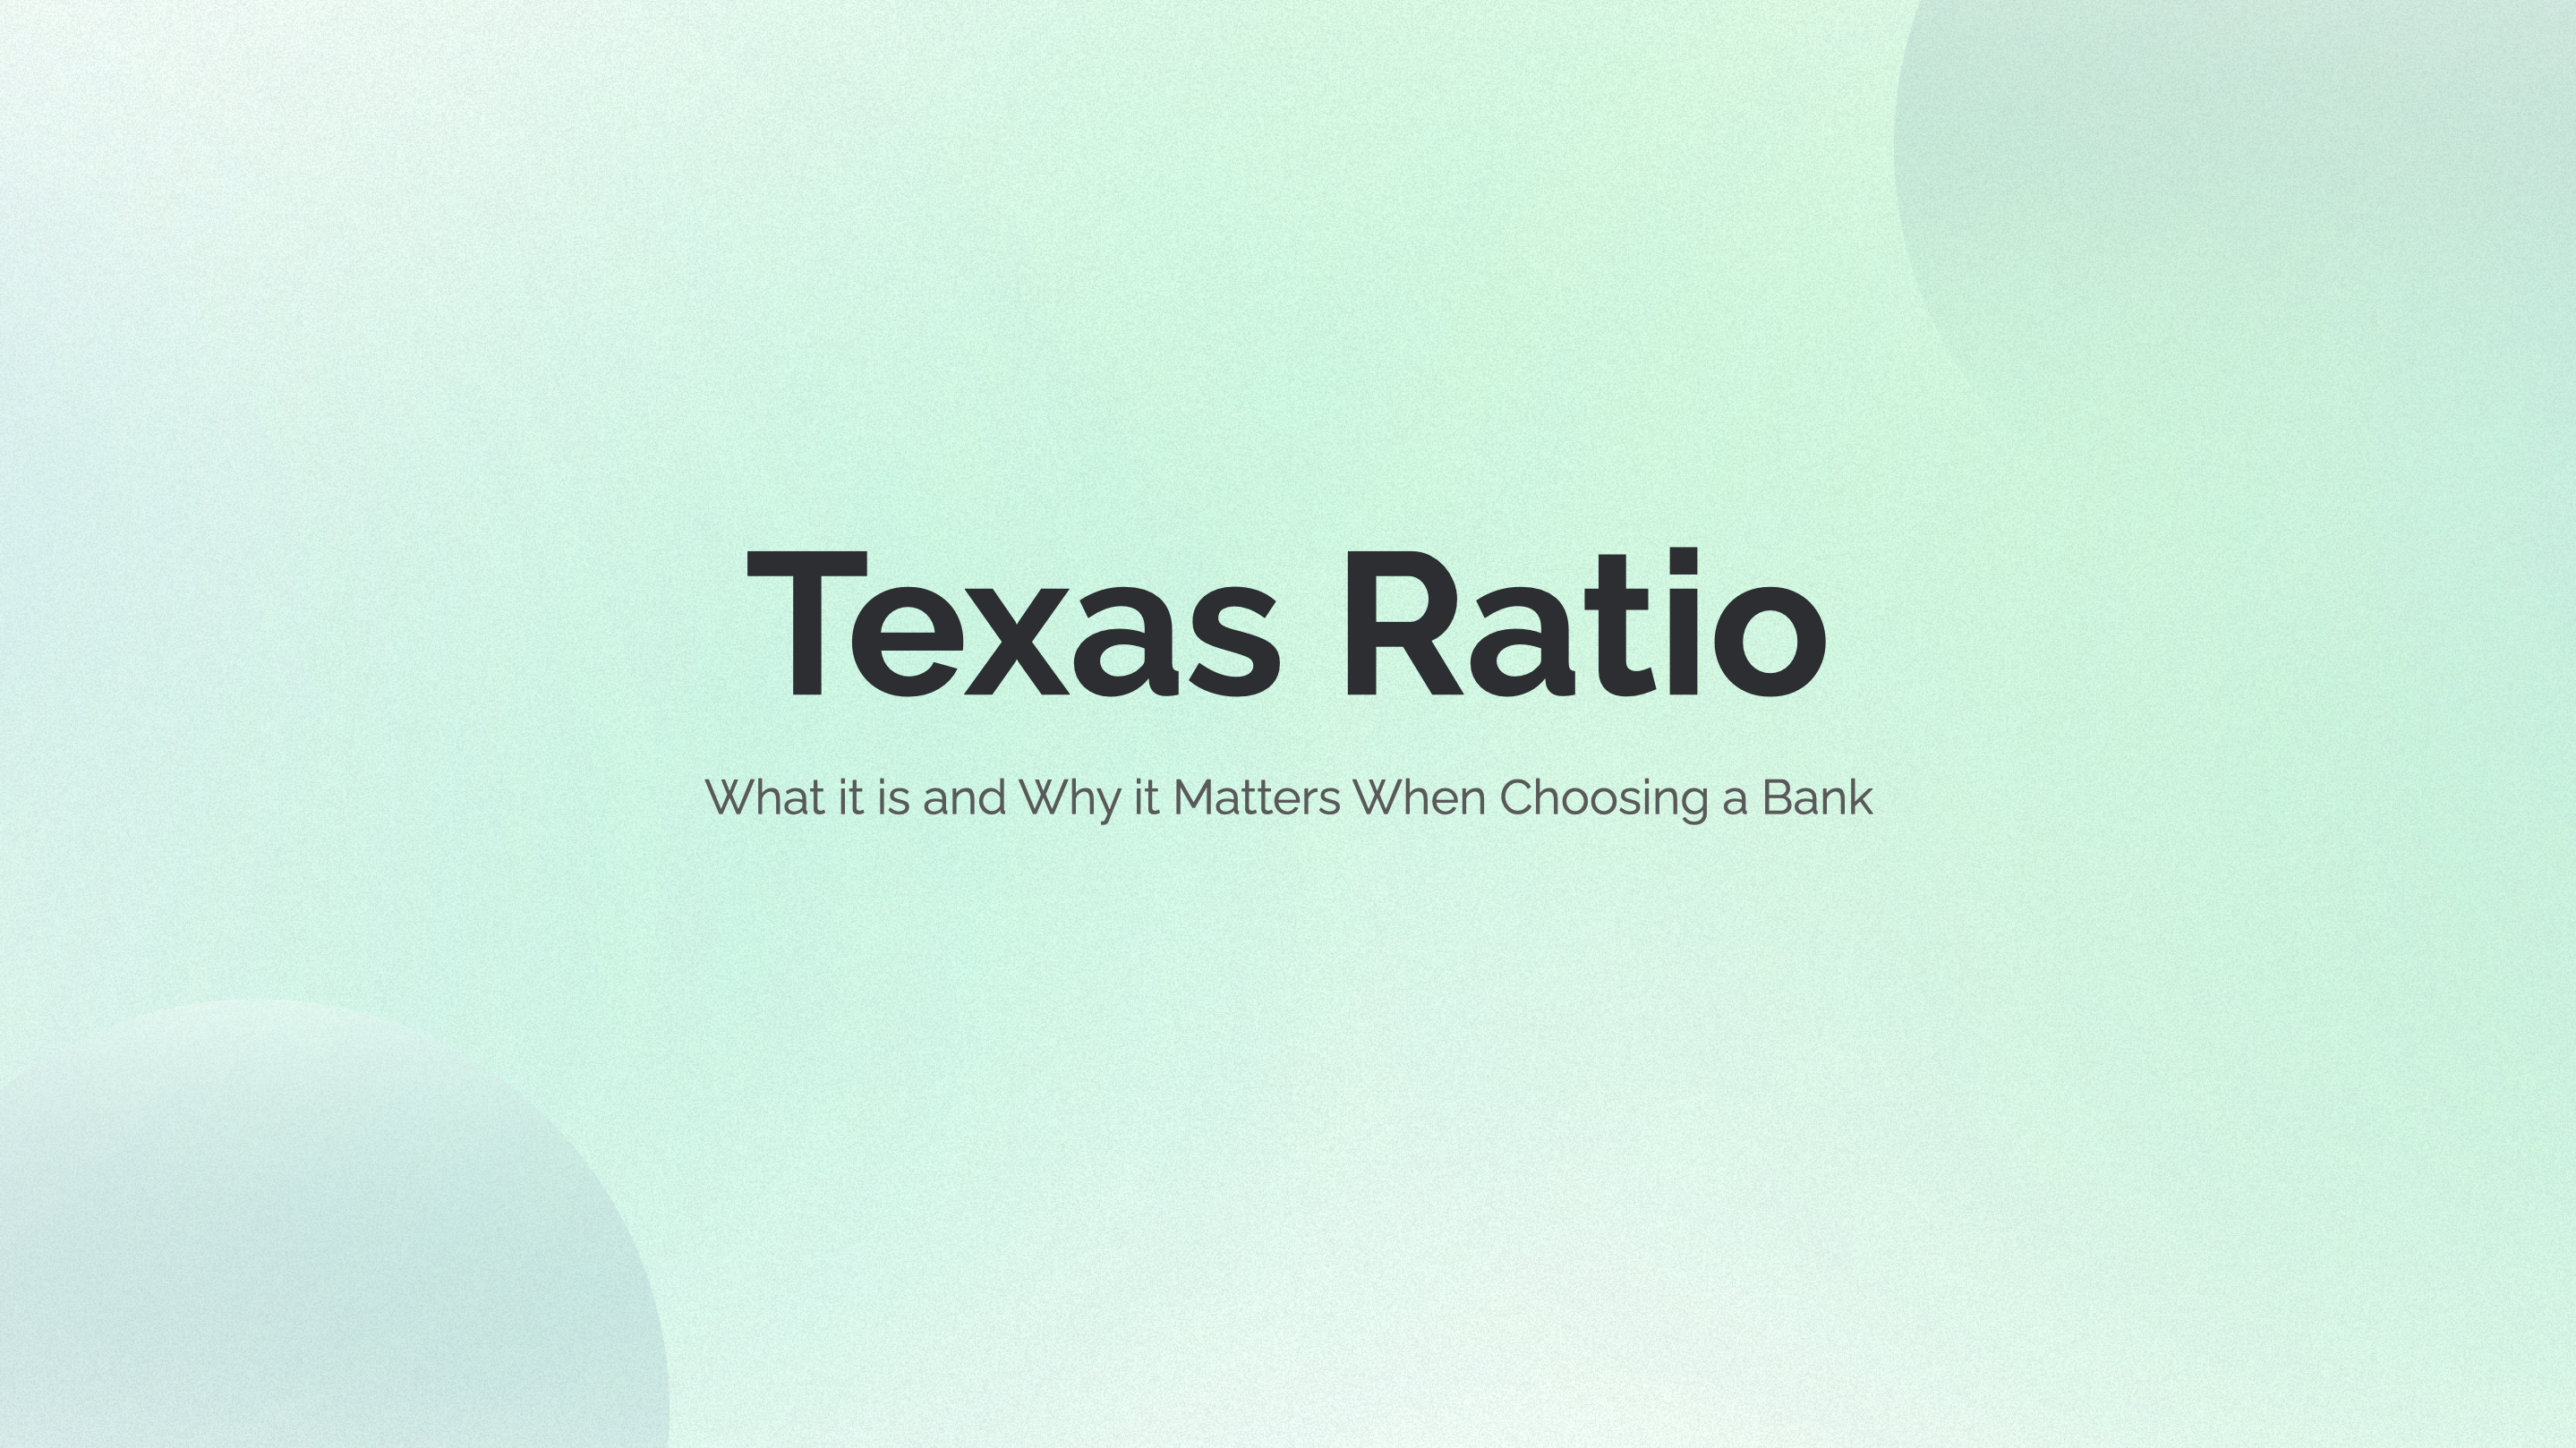 What is Texas Ratio and Why it is Mater when Choosing a Bank